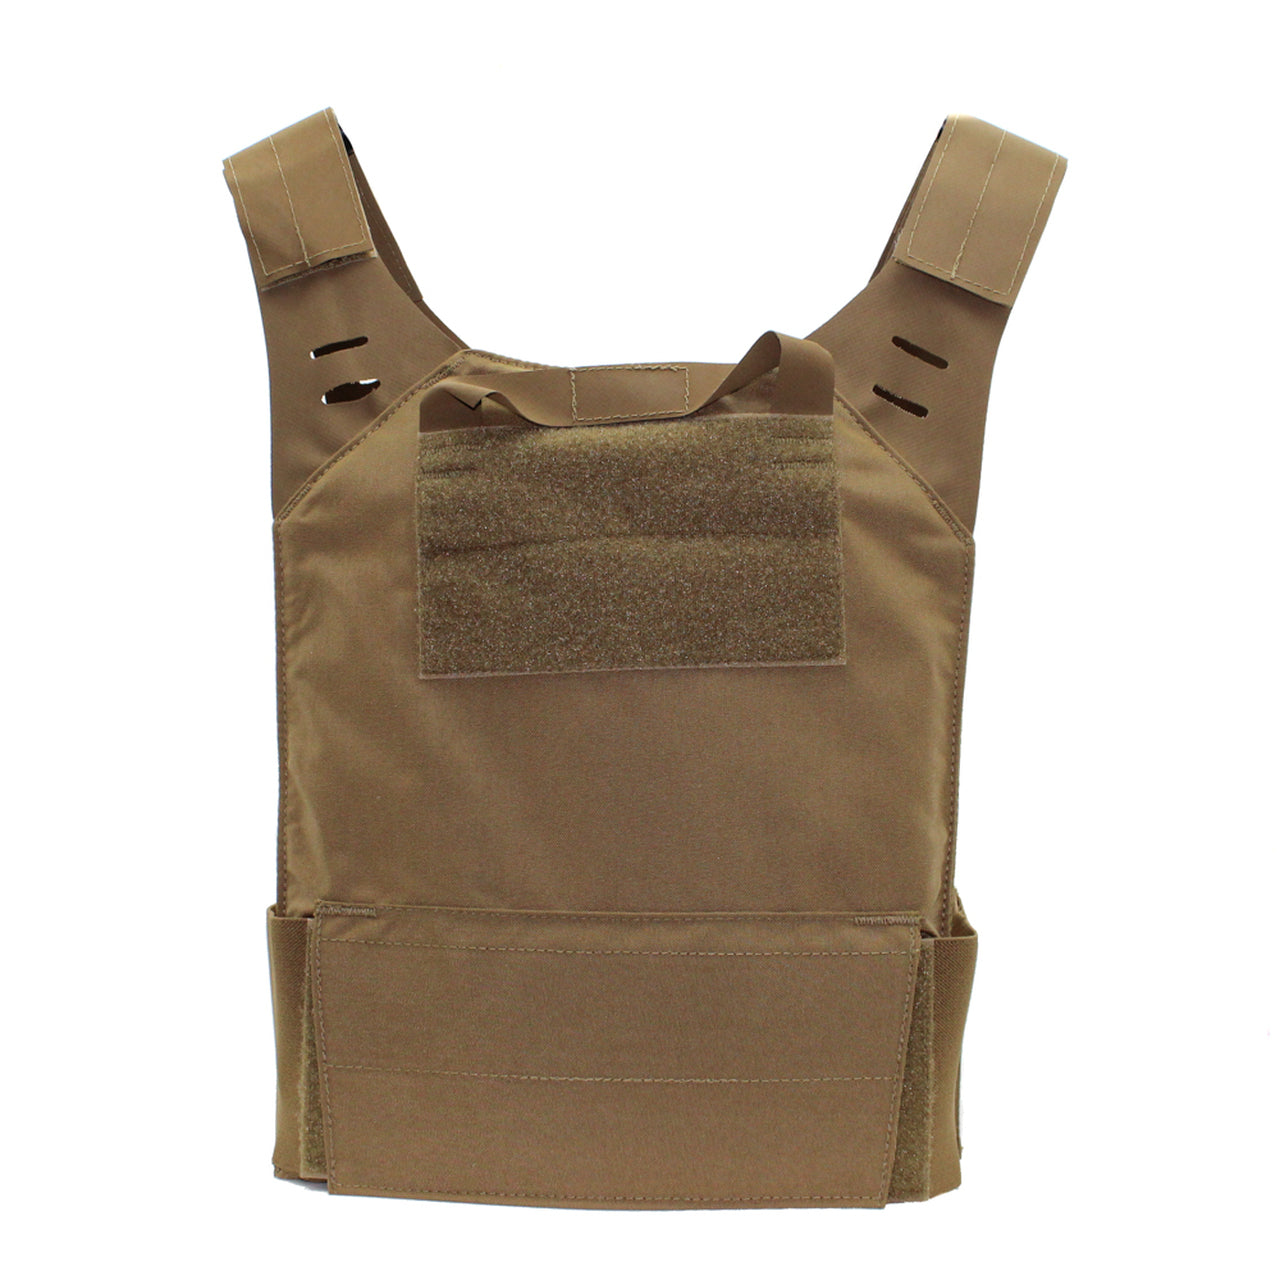 A Shellback Tactical Stealth Low Vis Plate Carrier on a white background.